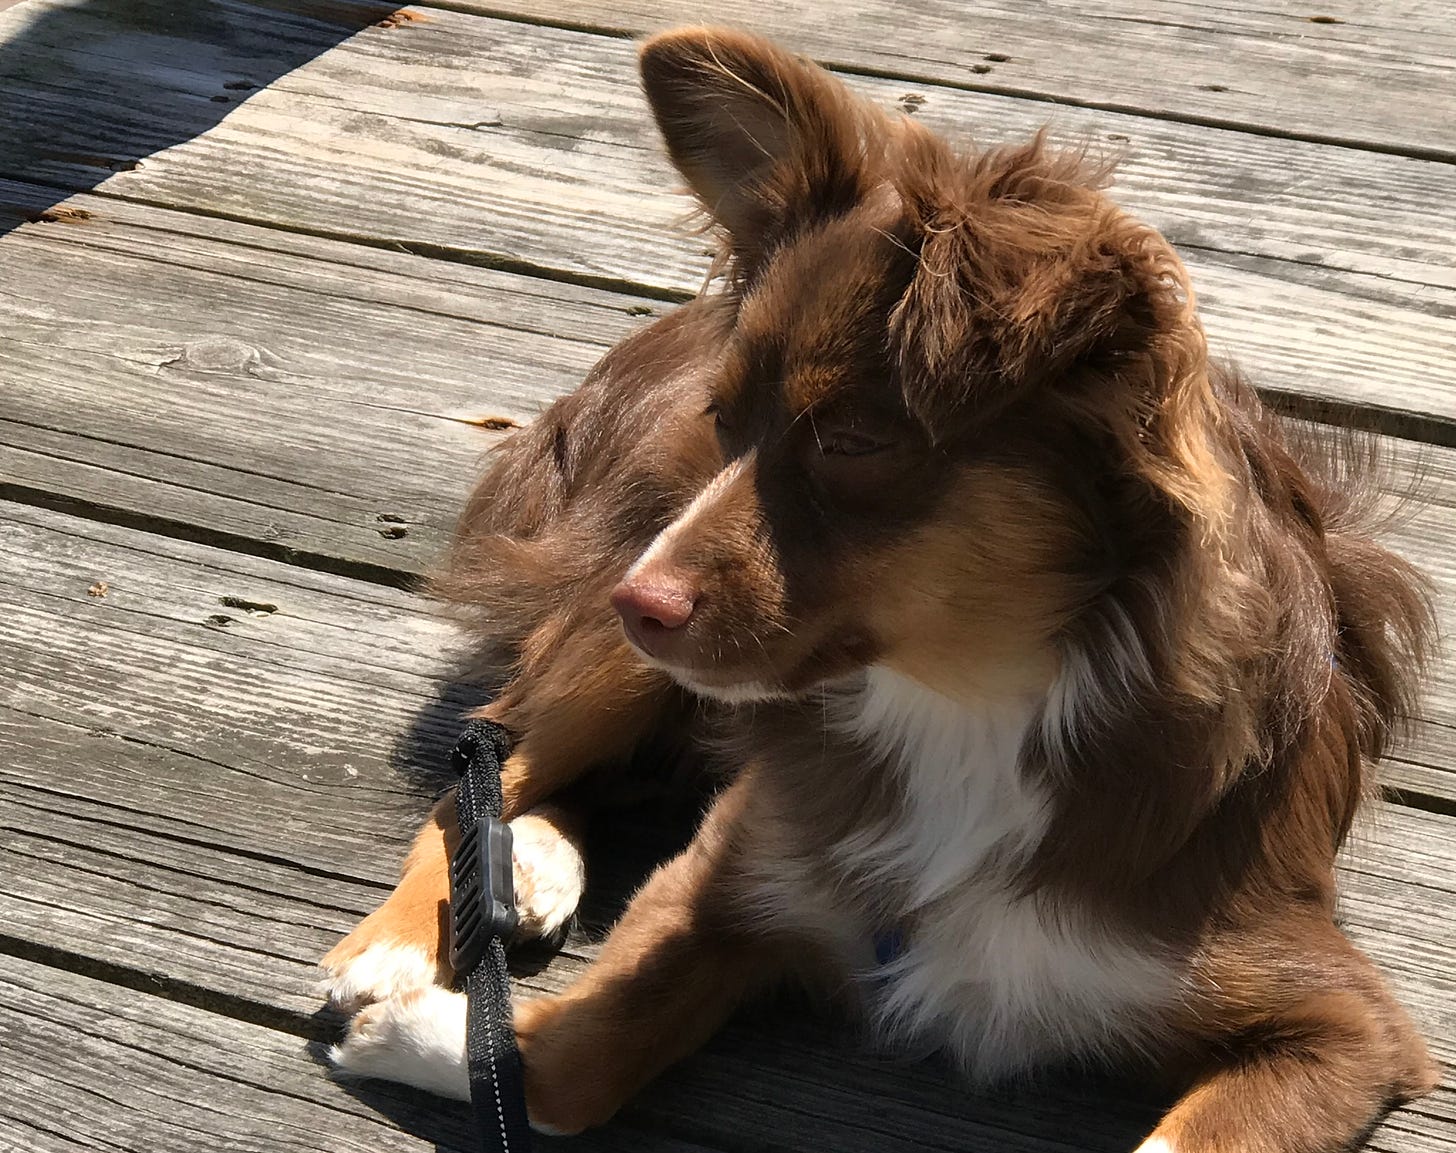 A young toy Australian shepherd lies in the sun on wooden boards. She is several shades of brown, copper and white (a “red tricolor”). One of her ears stands up, and the other flops over.